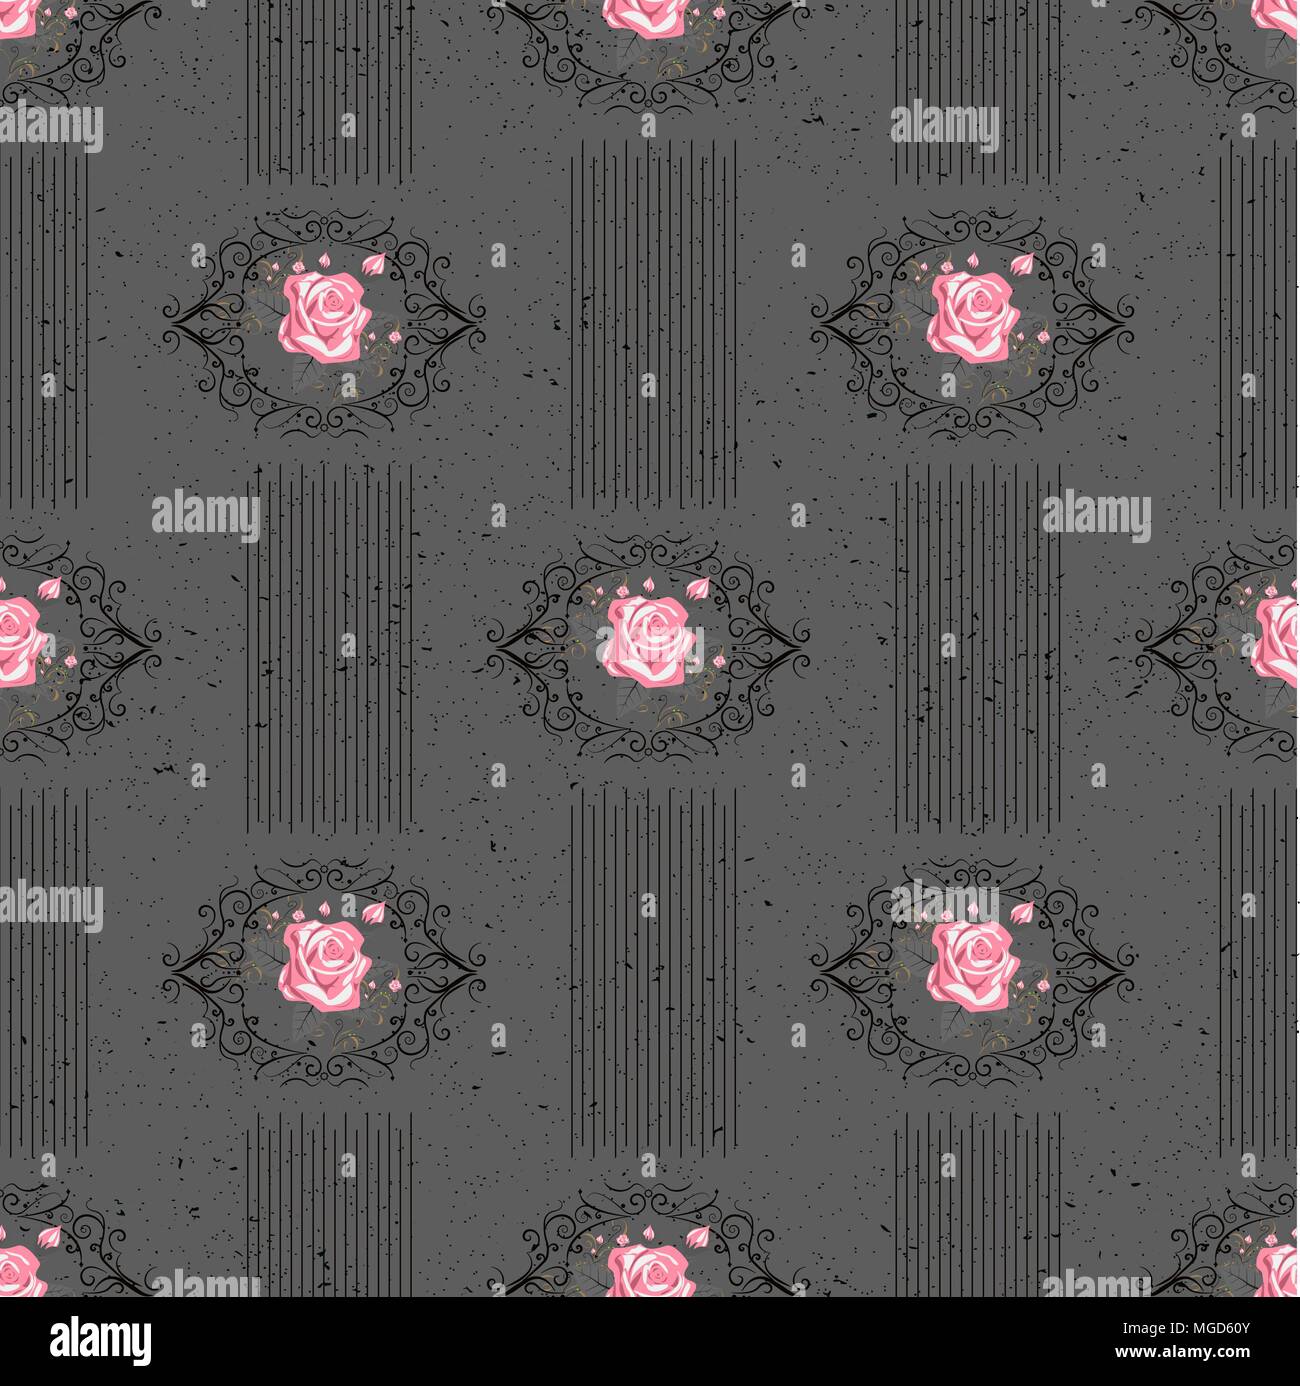 Seamless vector vintage pattern with Victorian bouquet of red flowers on a black background. White roses, tulips, delphinium with gray leaves.eps 10 Stock Vector